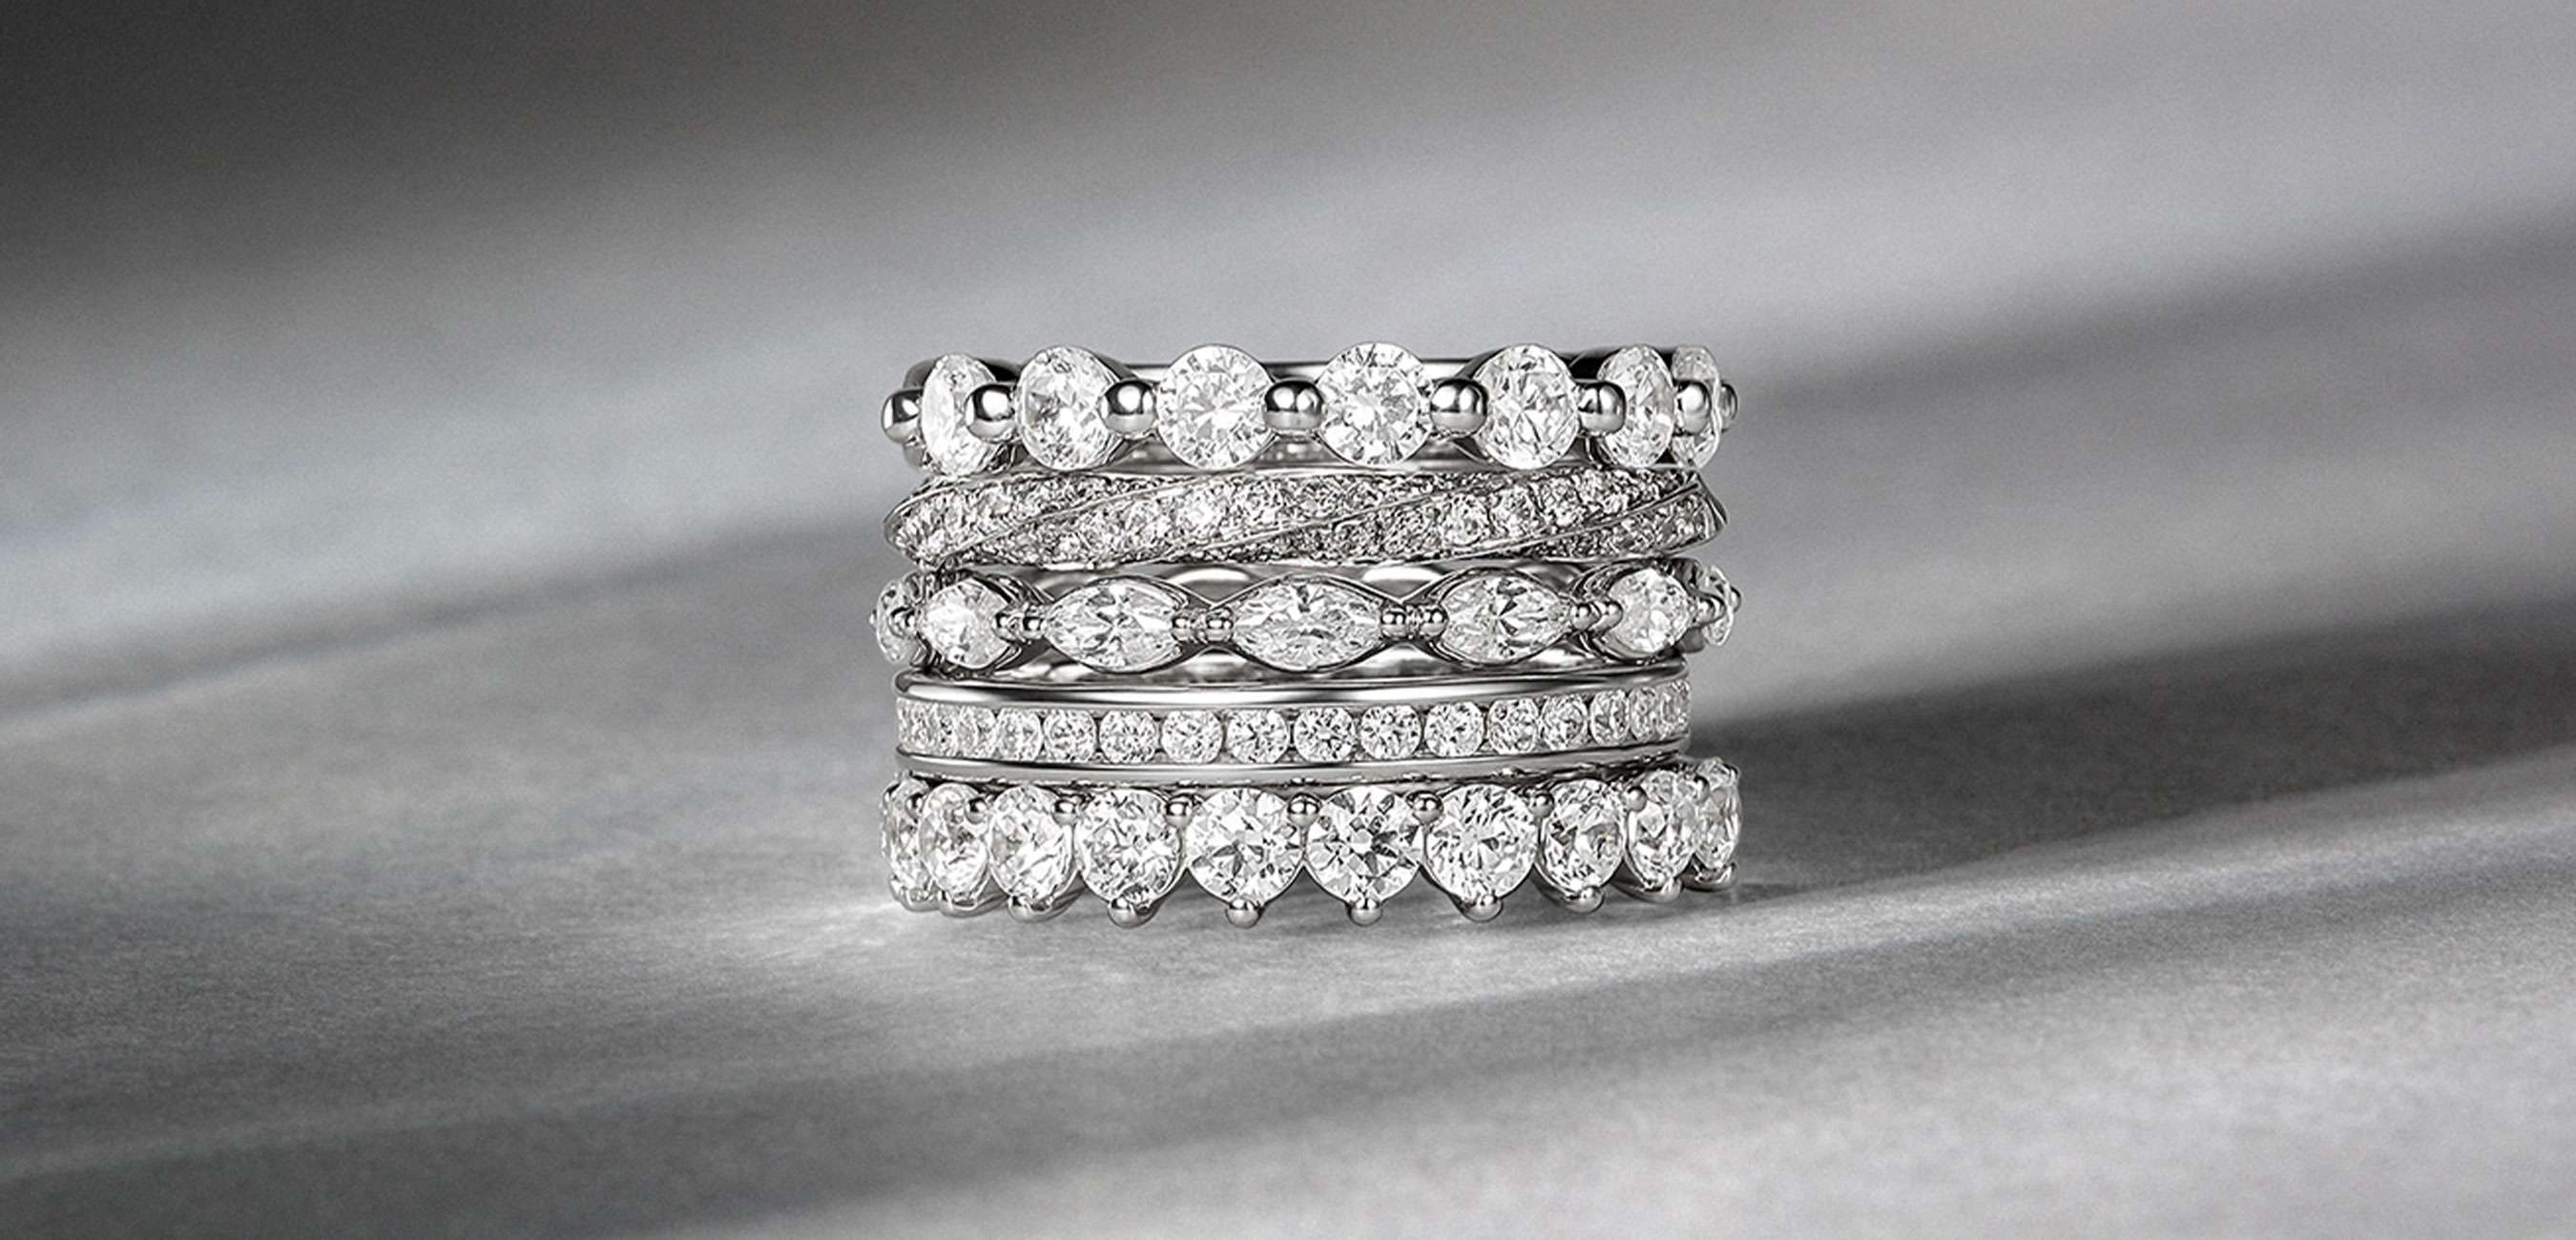 A Guide to Stacking Wedding Rings